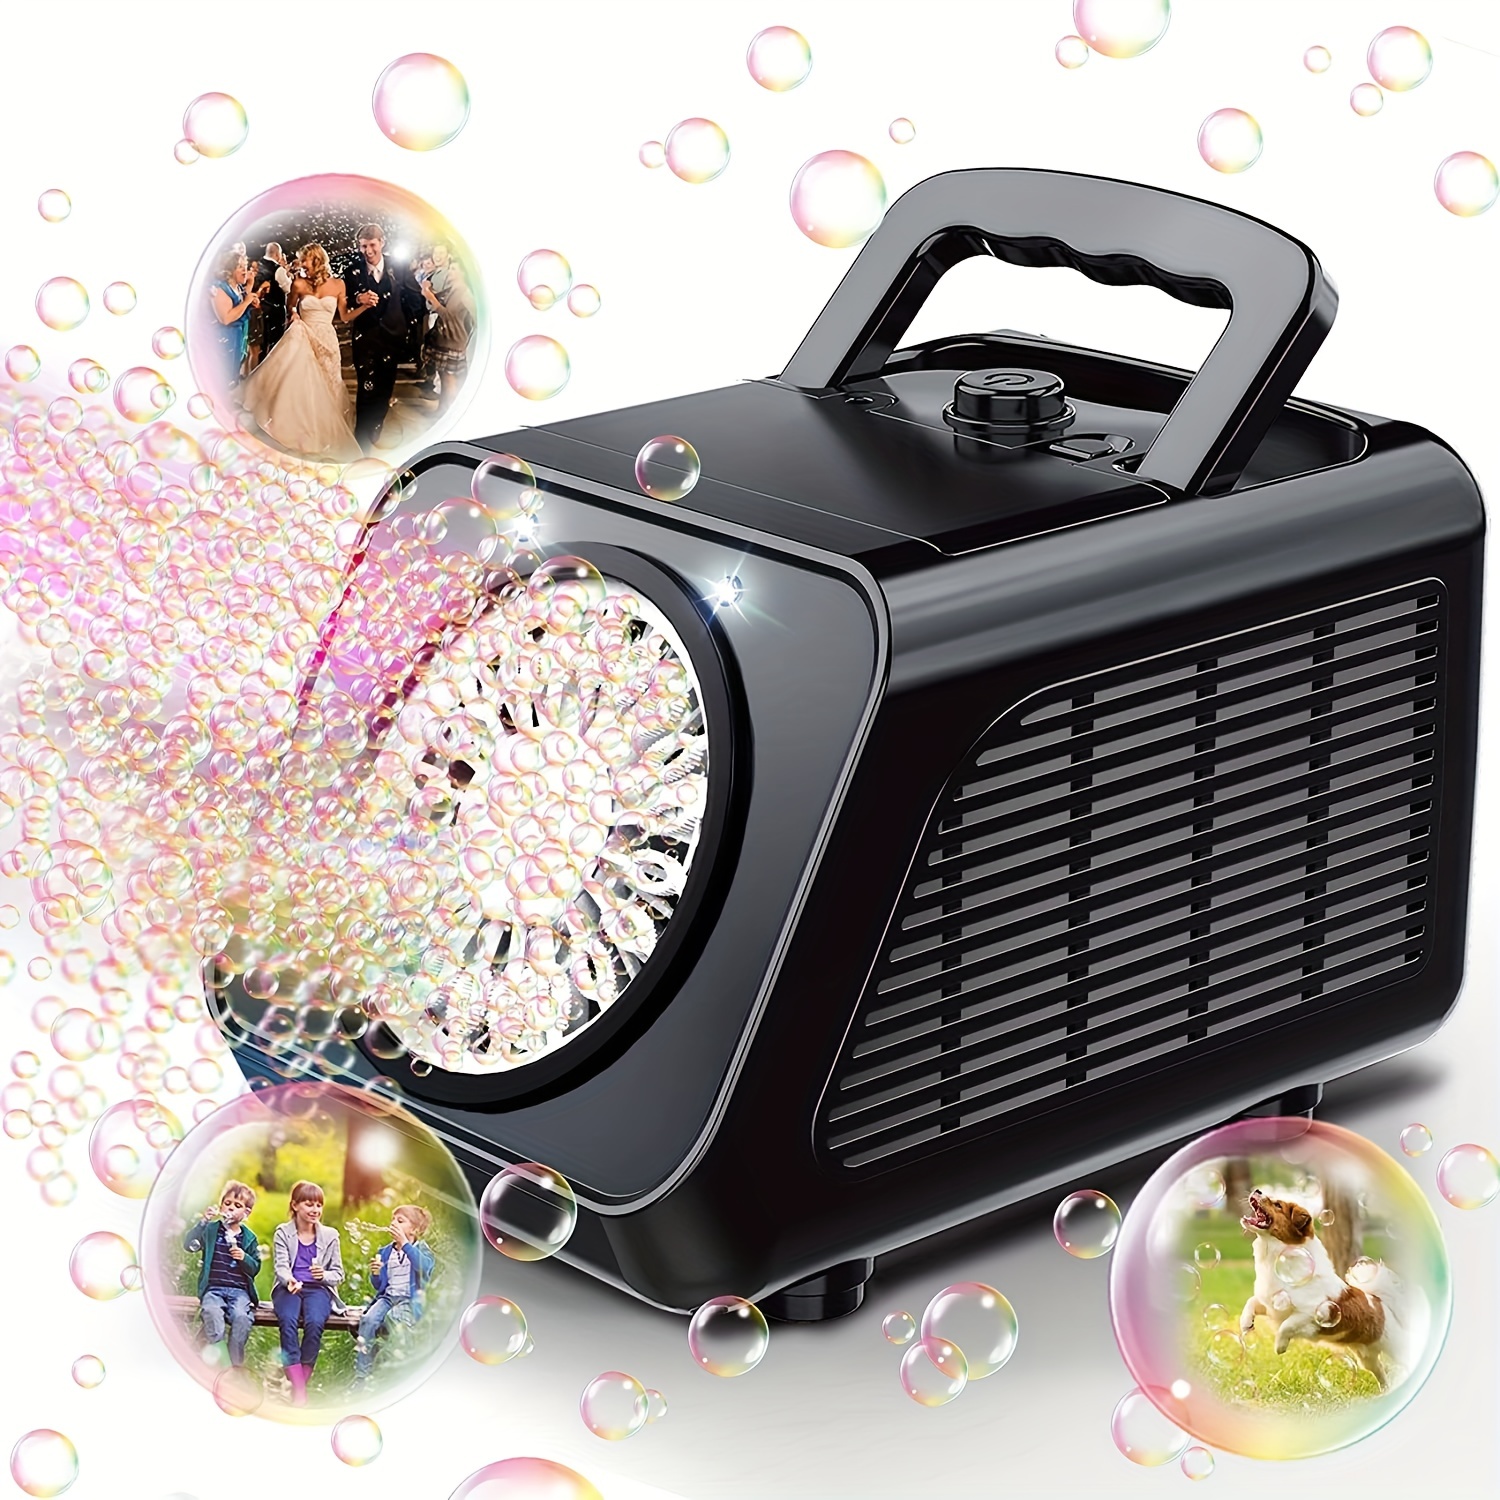 

Bubble Machine, Automatic Bubble Blower Electronics Bubble Maker For Kids 15000+ Bubbles Per Minute With 2 Speeds, Outdoor Bubbles Toy For Outdoor/indoor Party Birthday